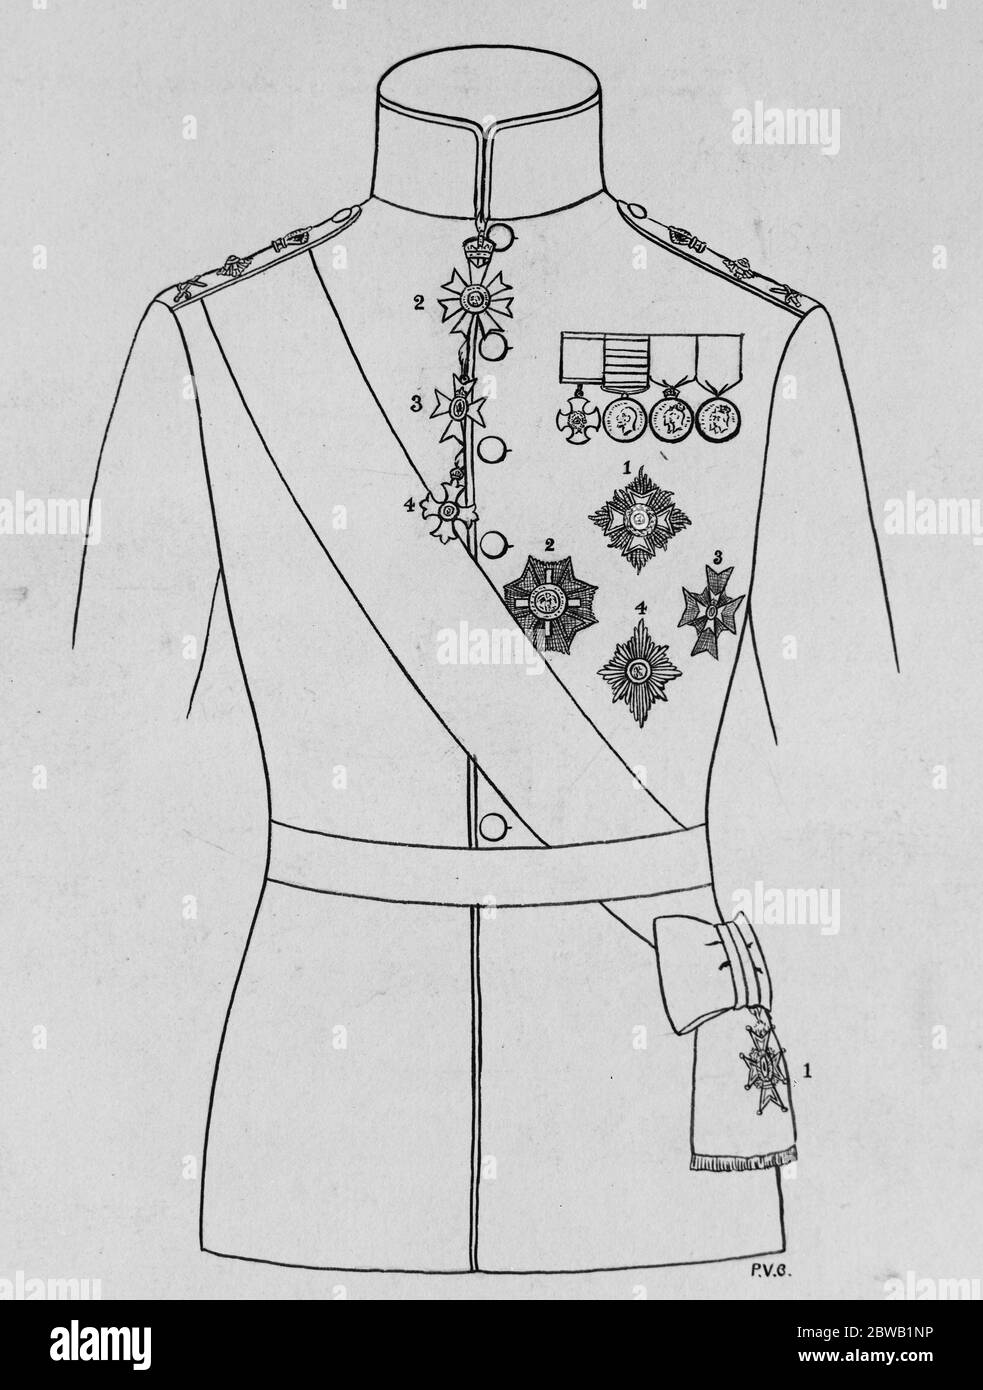 Illustration from Mr H Tendell 's new book  Dress and Insignia Worn at Court  . Photo shows one of the diagrams showing the position in which Insignia of different Orders should be worn together . 1921 Stock Photo